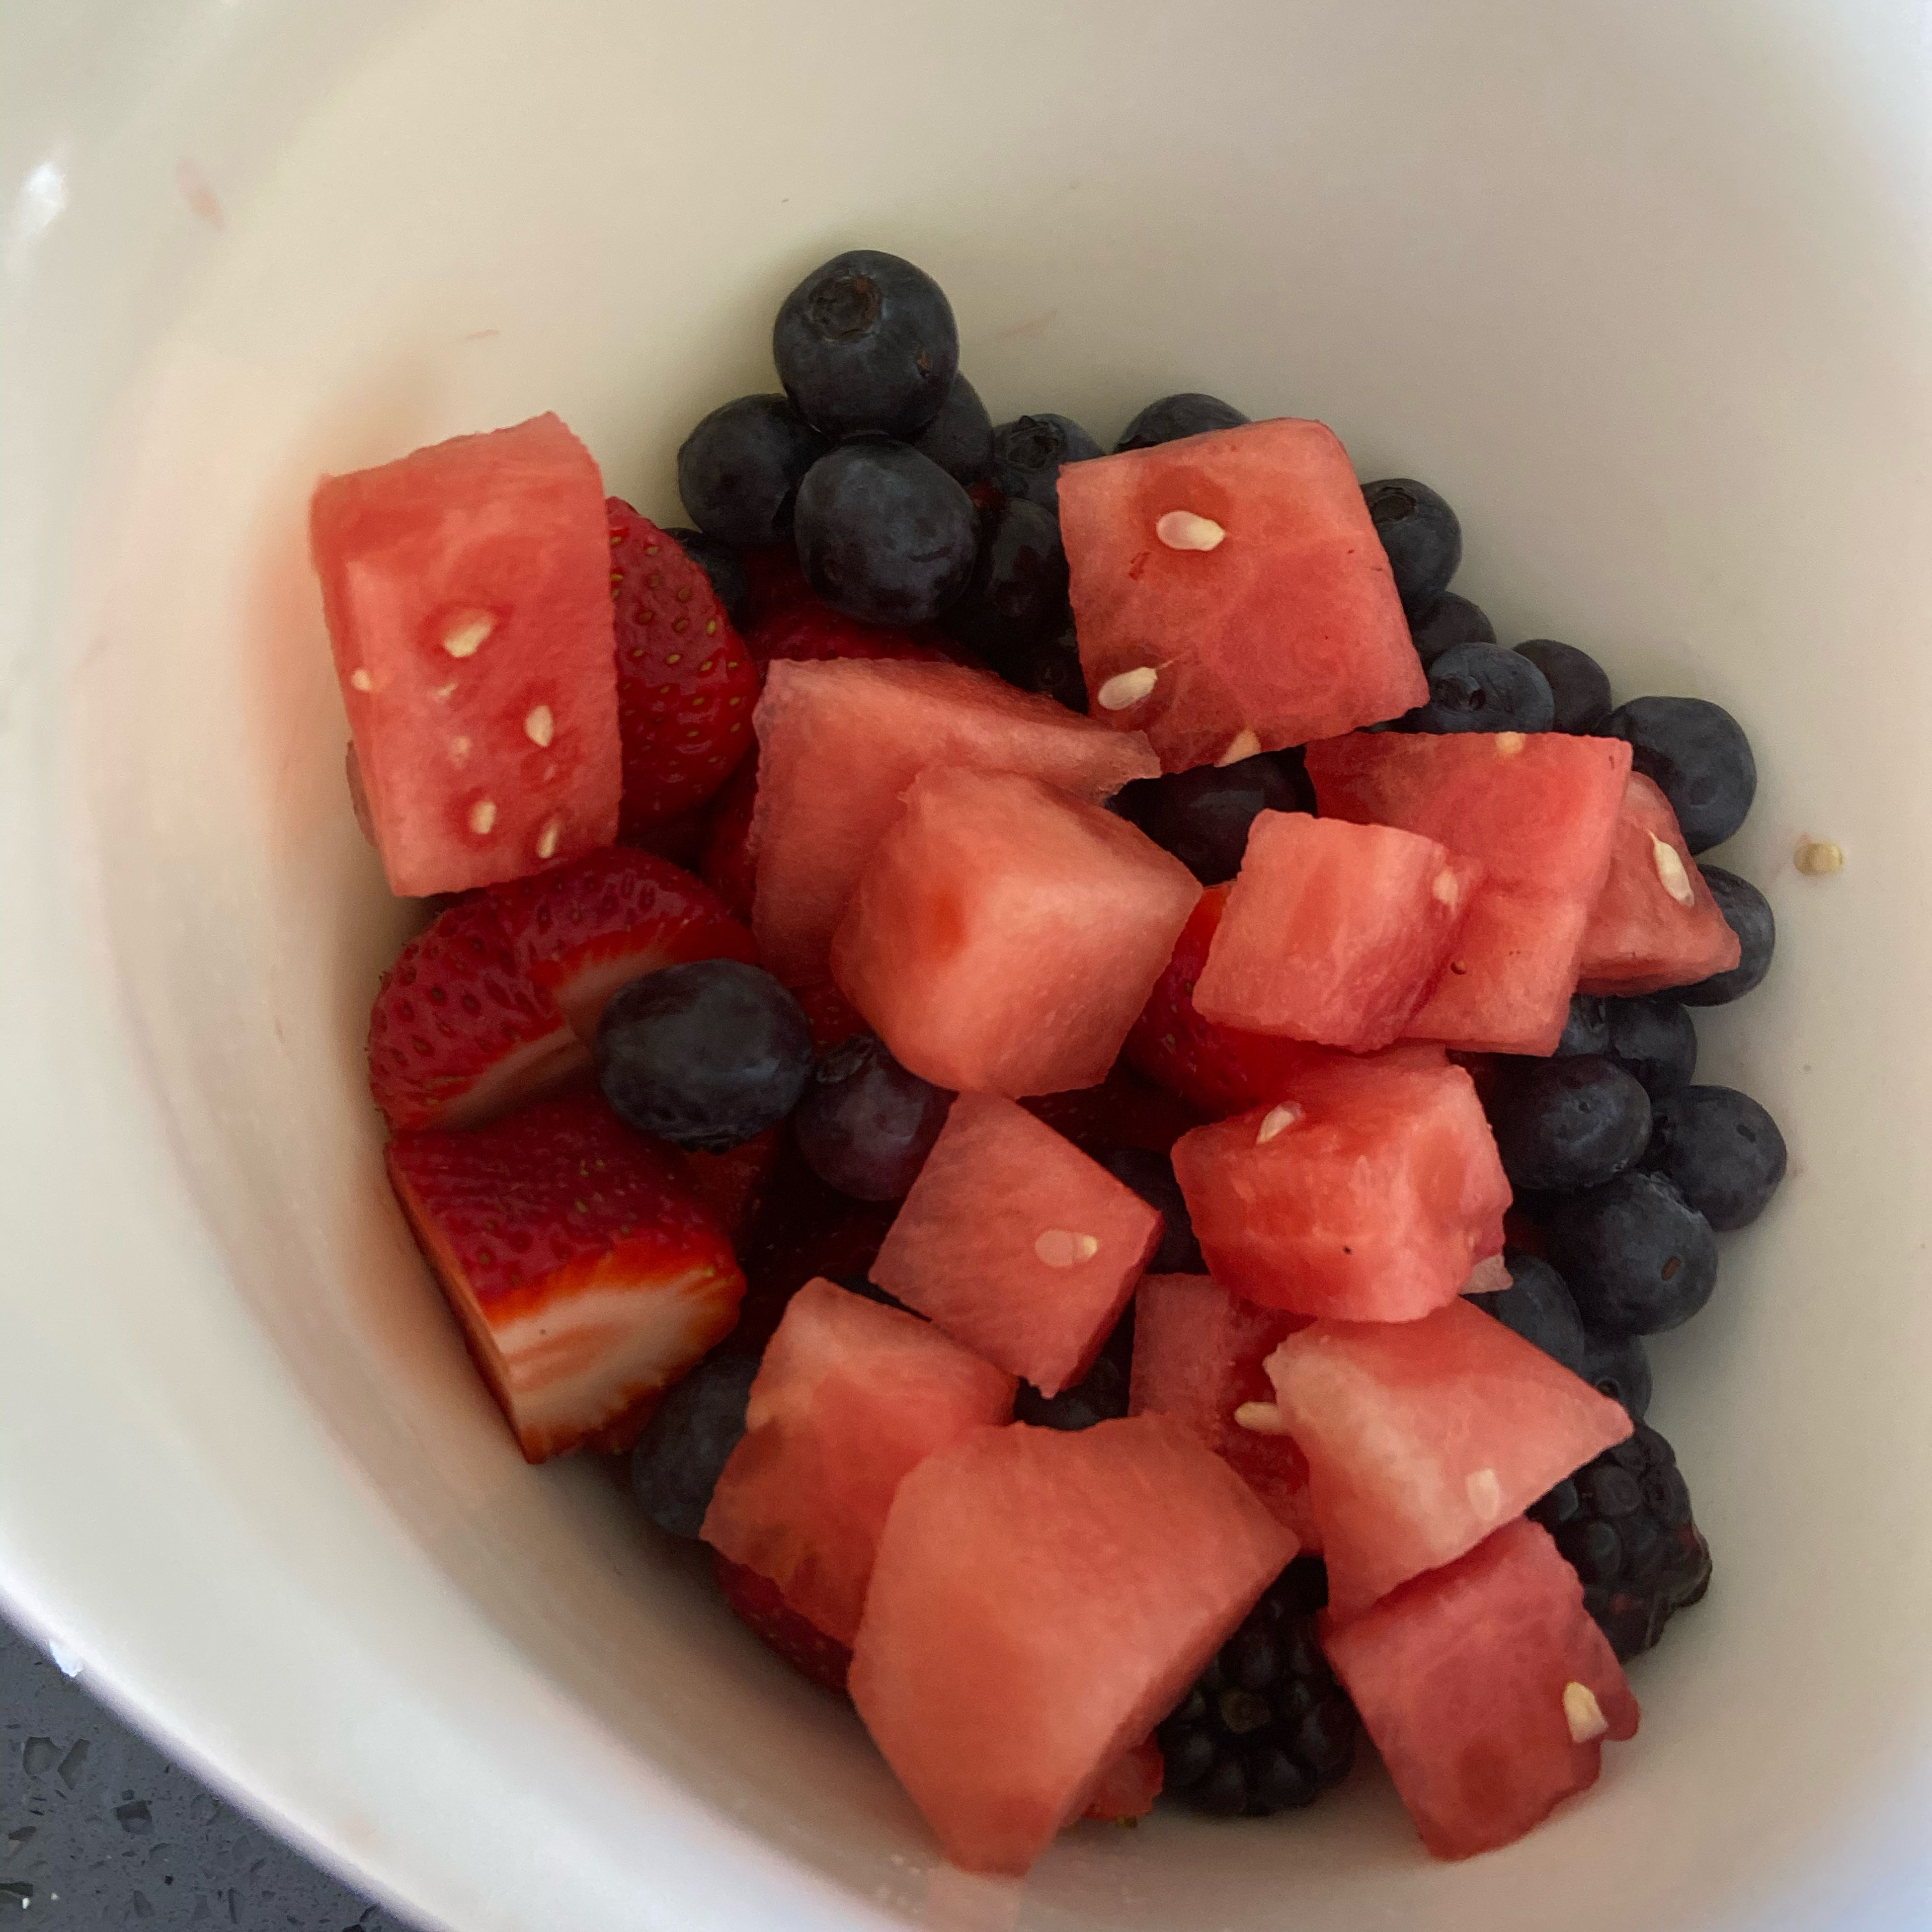 Put the watermelon in the bowl with the strawberries,blueberries,and raspberries